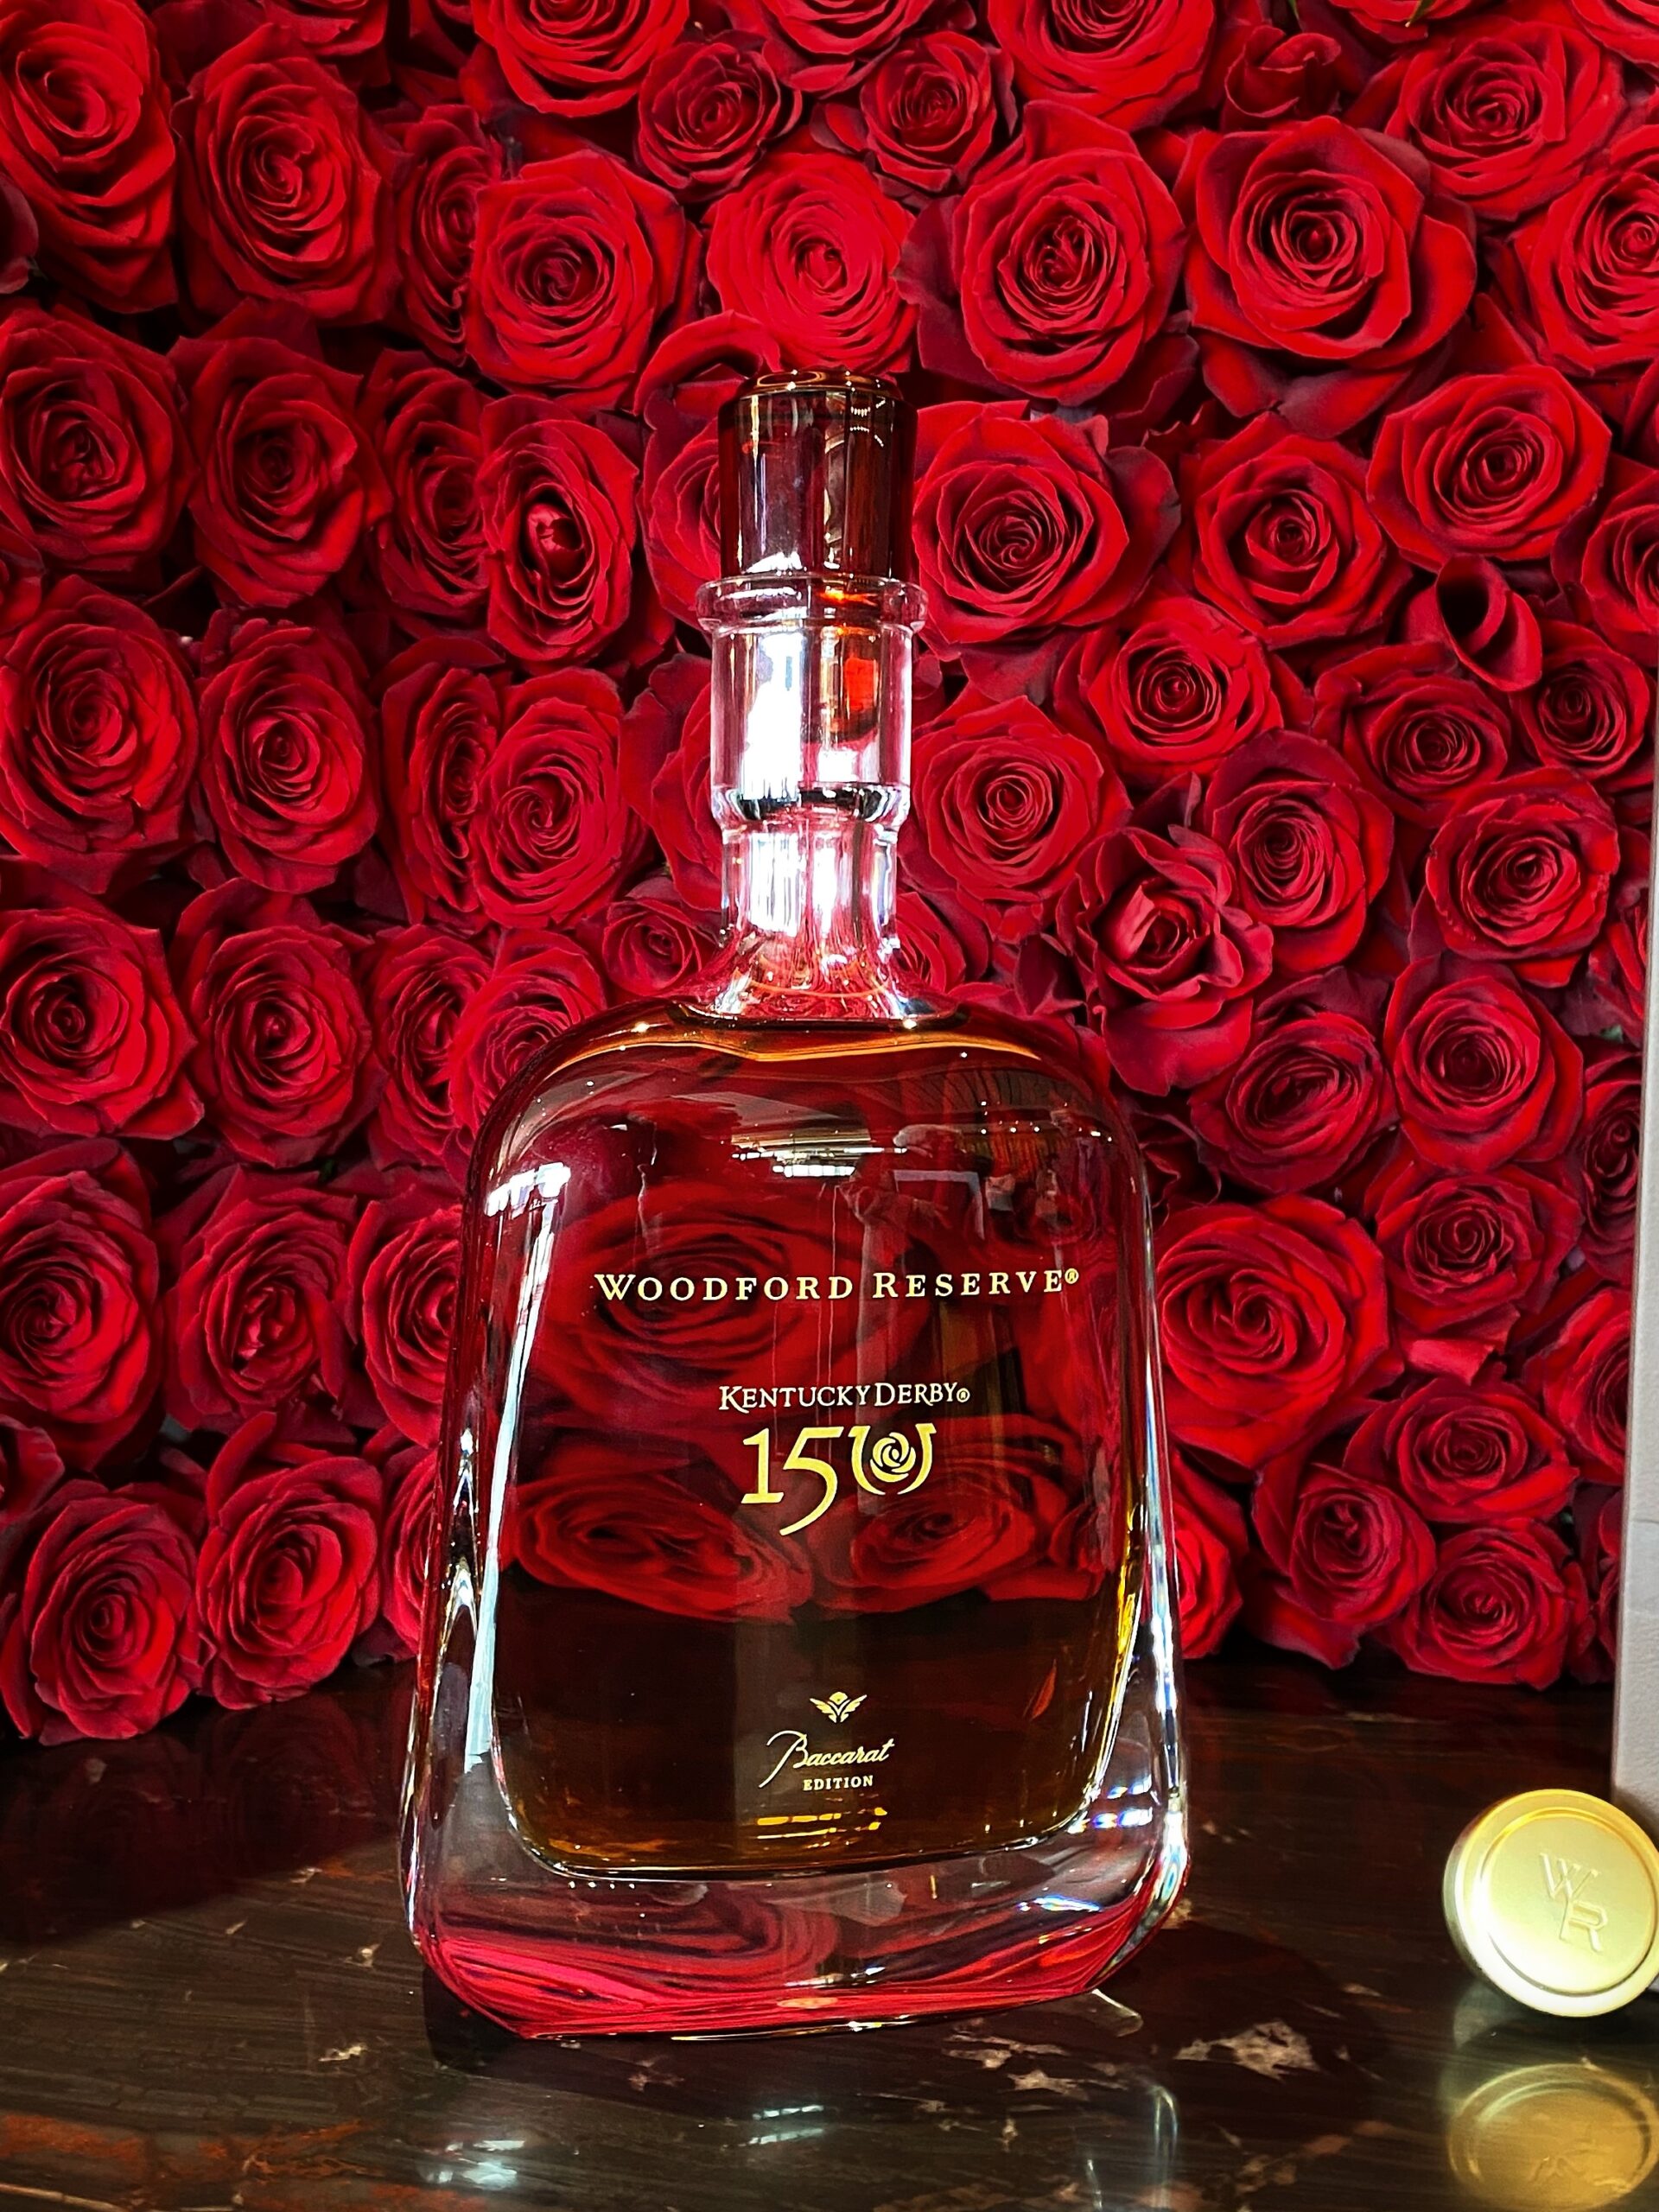 Rare, $15,000 Woodford Reserve Baccarat Crystal Decanter Unveiled for Derby 150